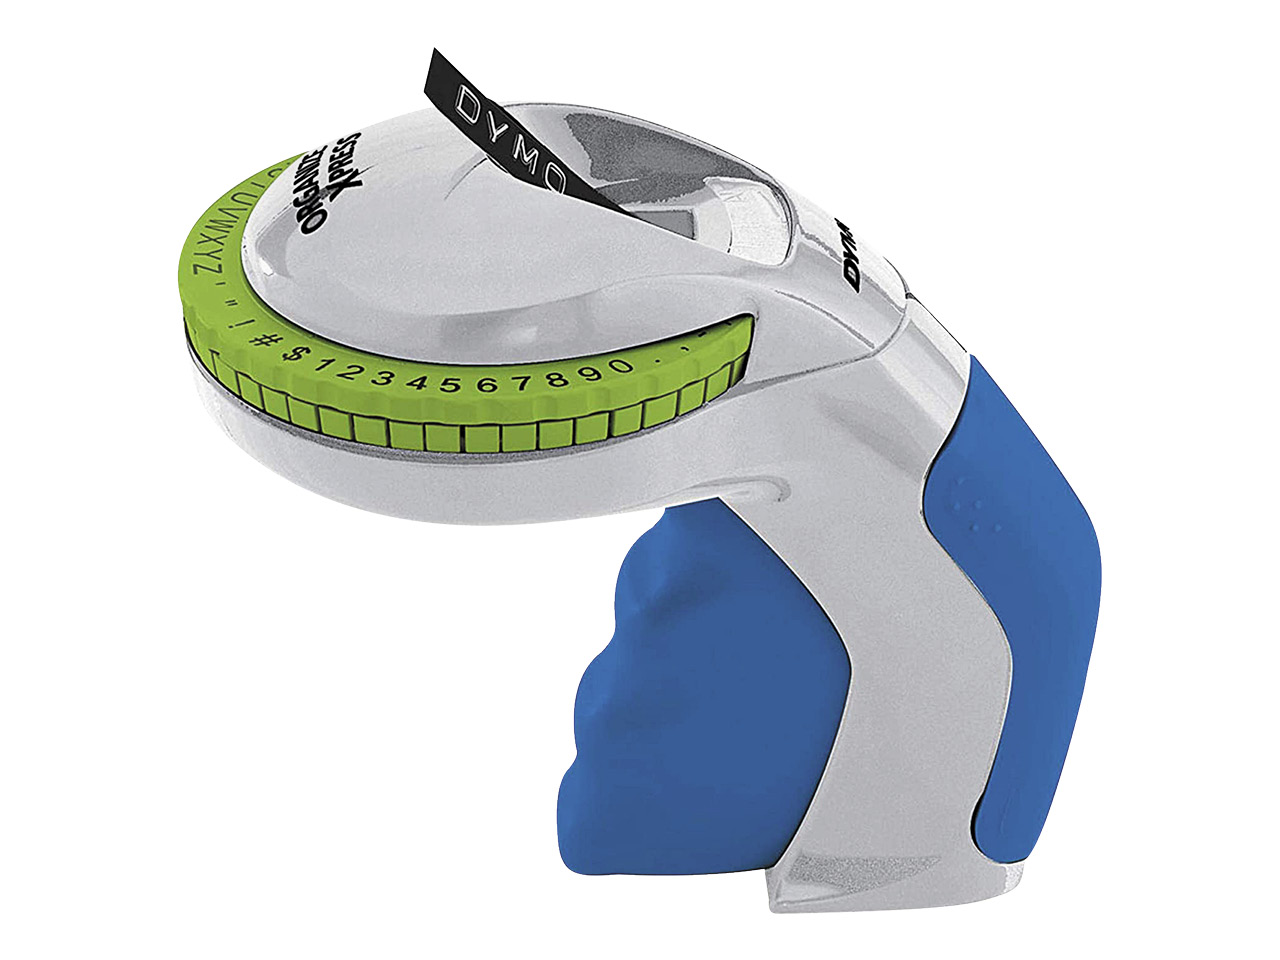 A Dymo white, blue and green label maker in a compact model.